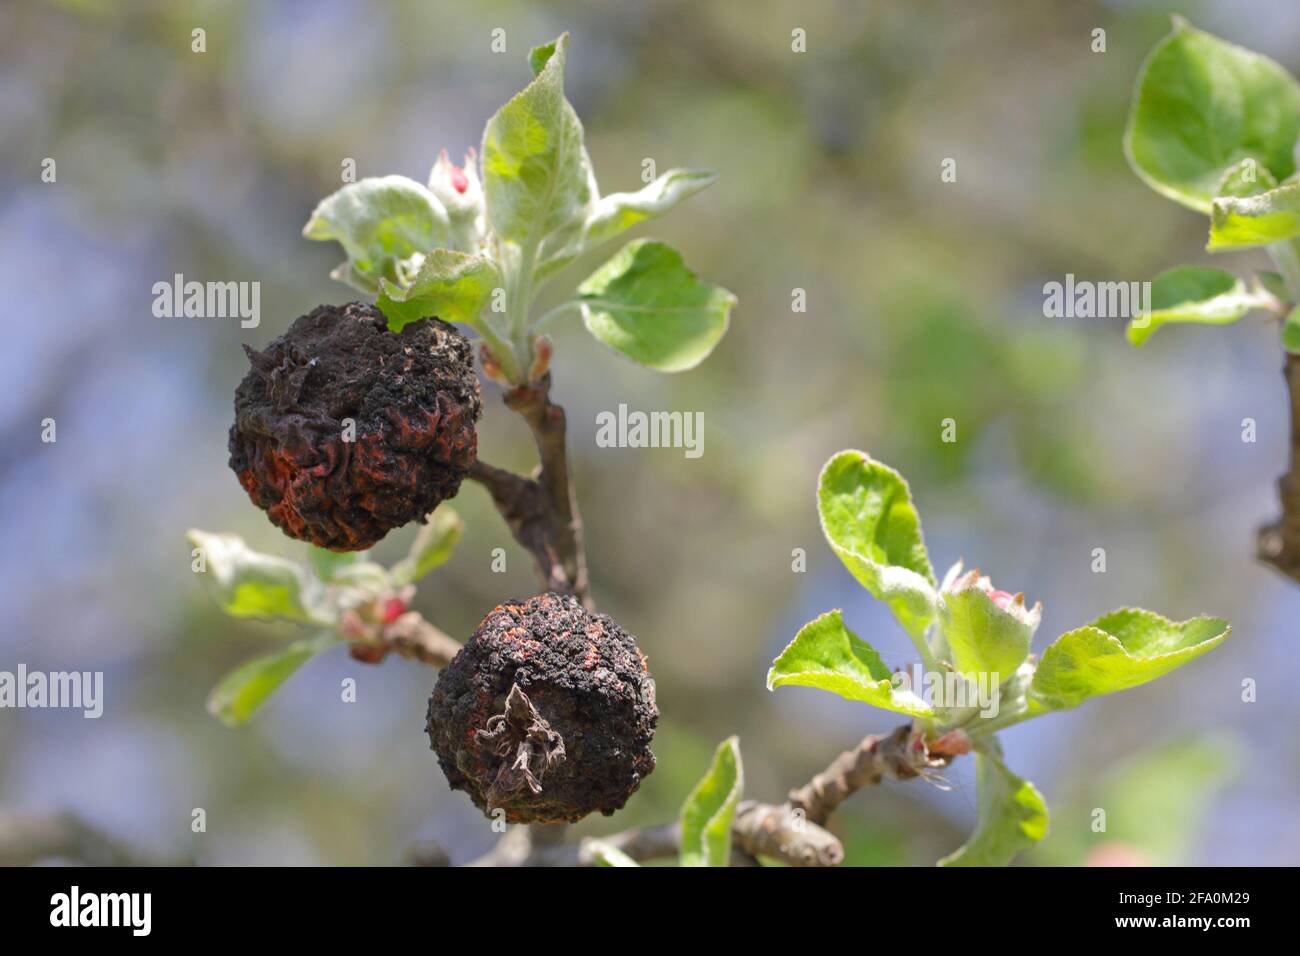 Monilia. Apples damaged by Fungal Disease Monilia fructigena in Orchard disease. Mummy of an apple attacked by moniliosis. Stock Photo